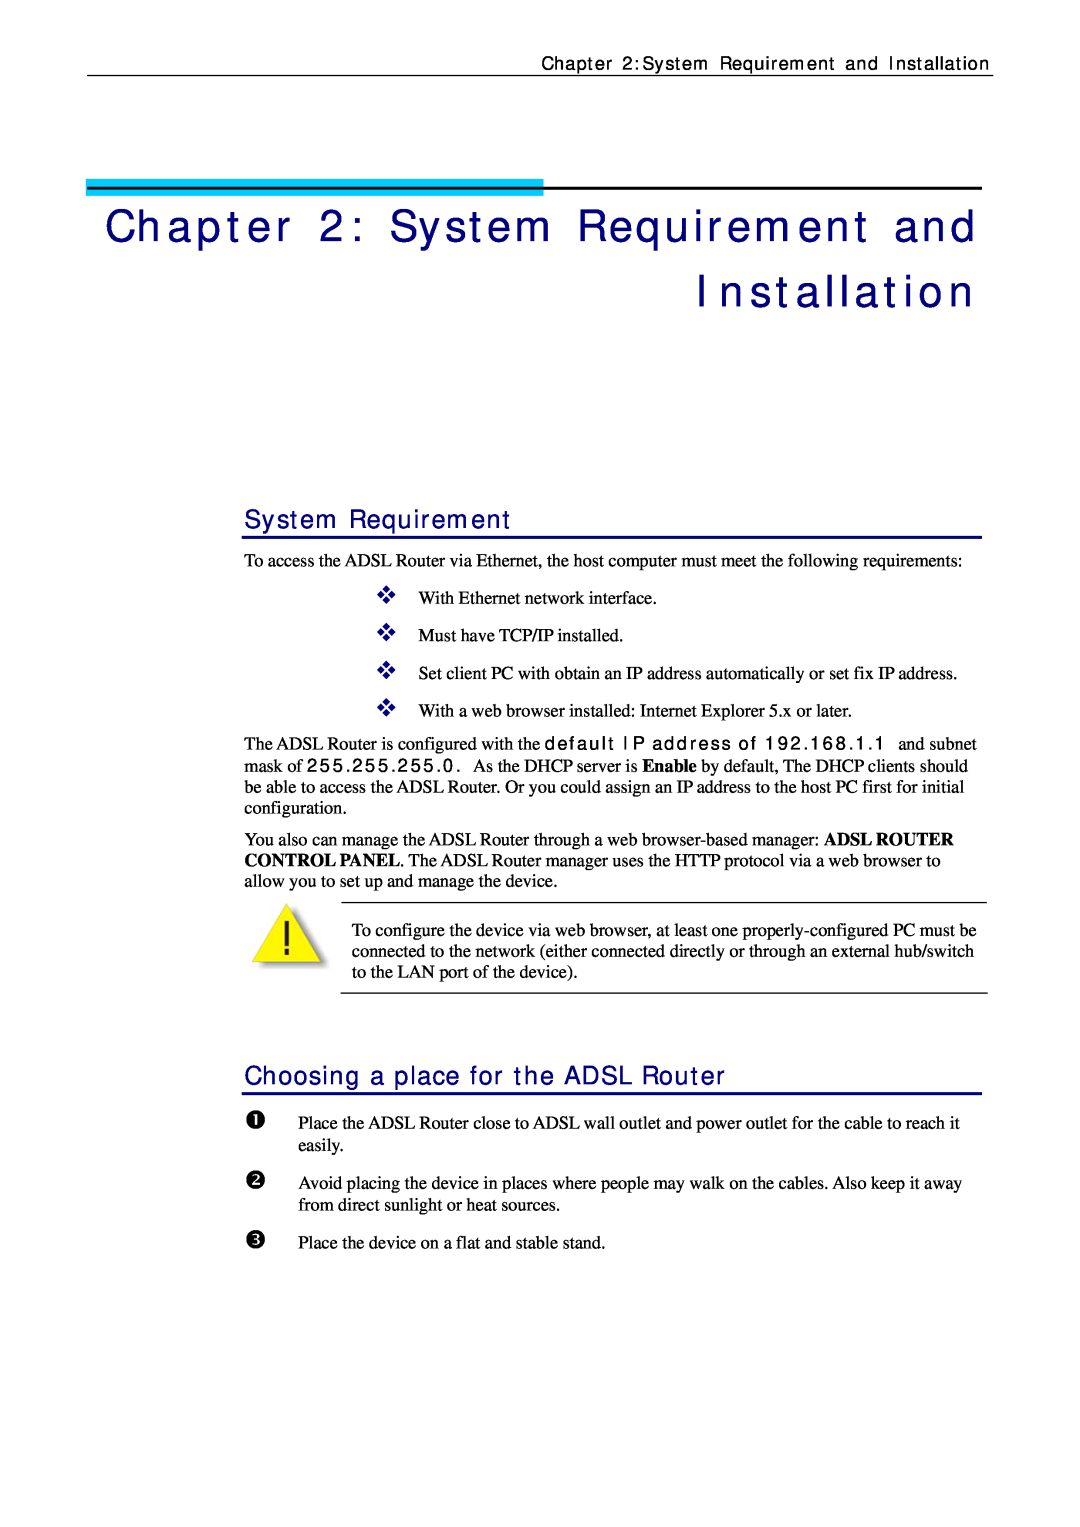 Siemens CL-010-I manual System Requirement and Installation, Choosing a place for the ADSL Router, ™ ™ ™ ™ 